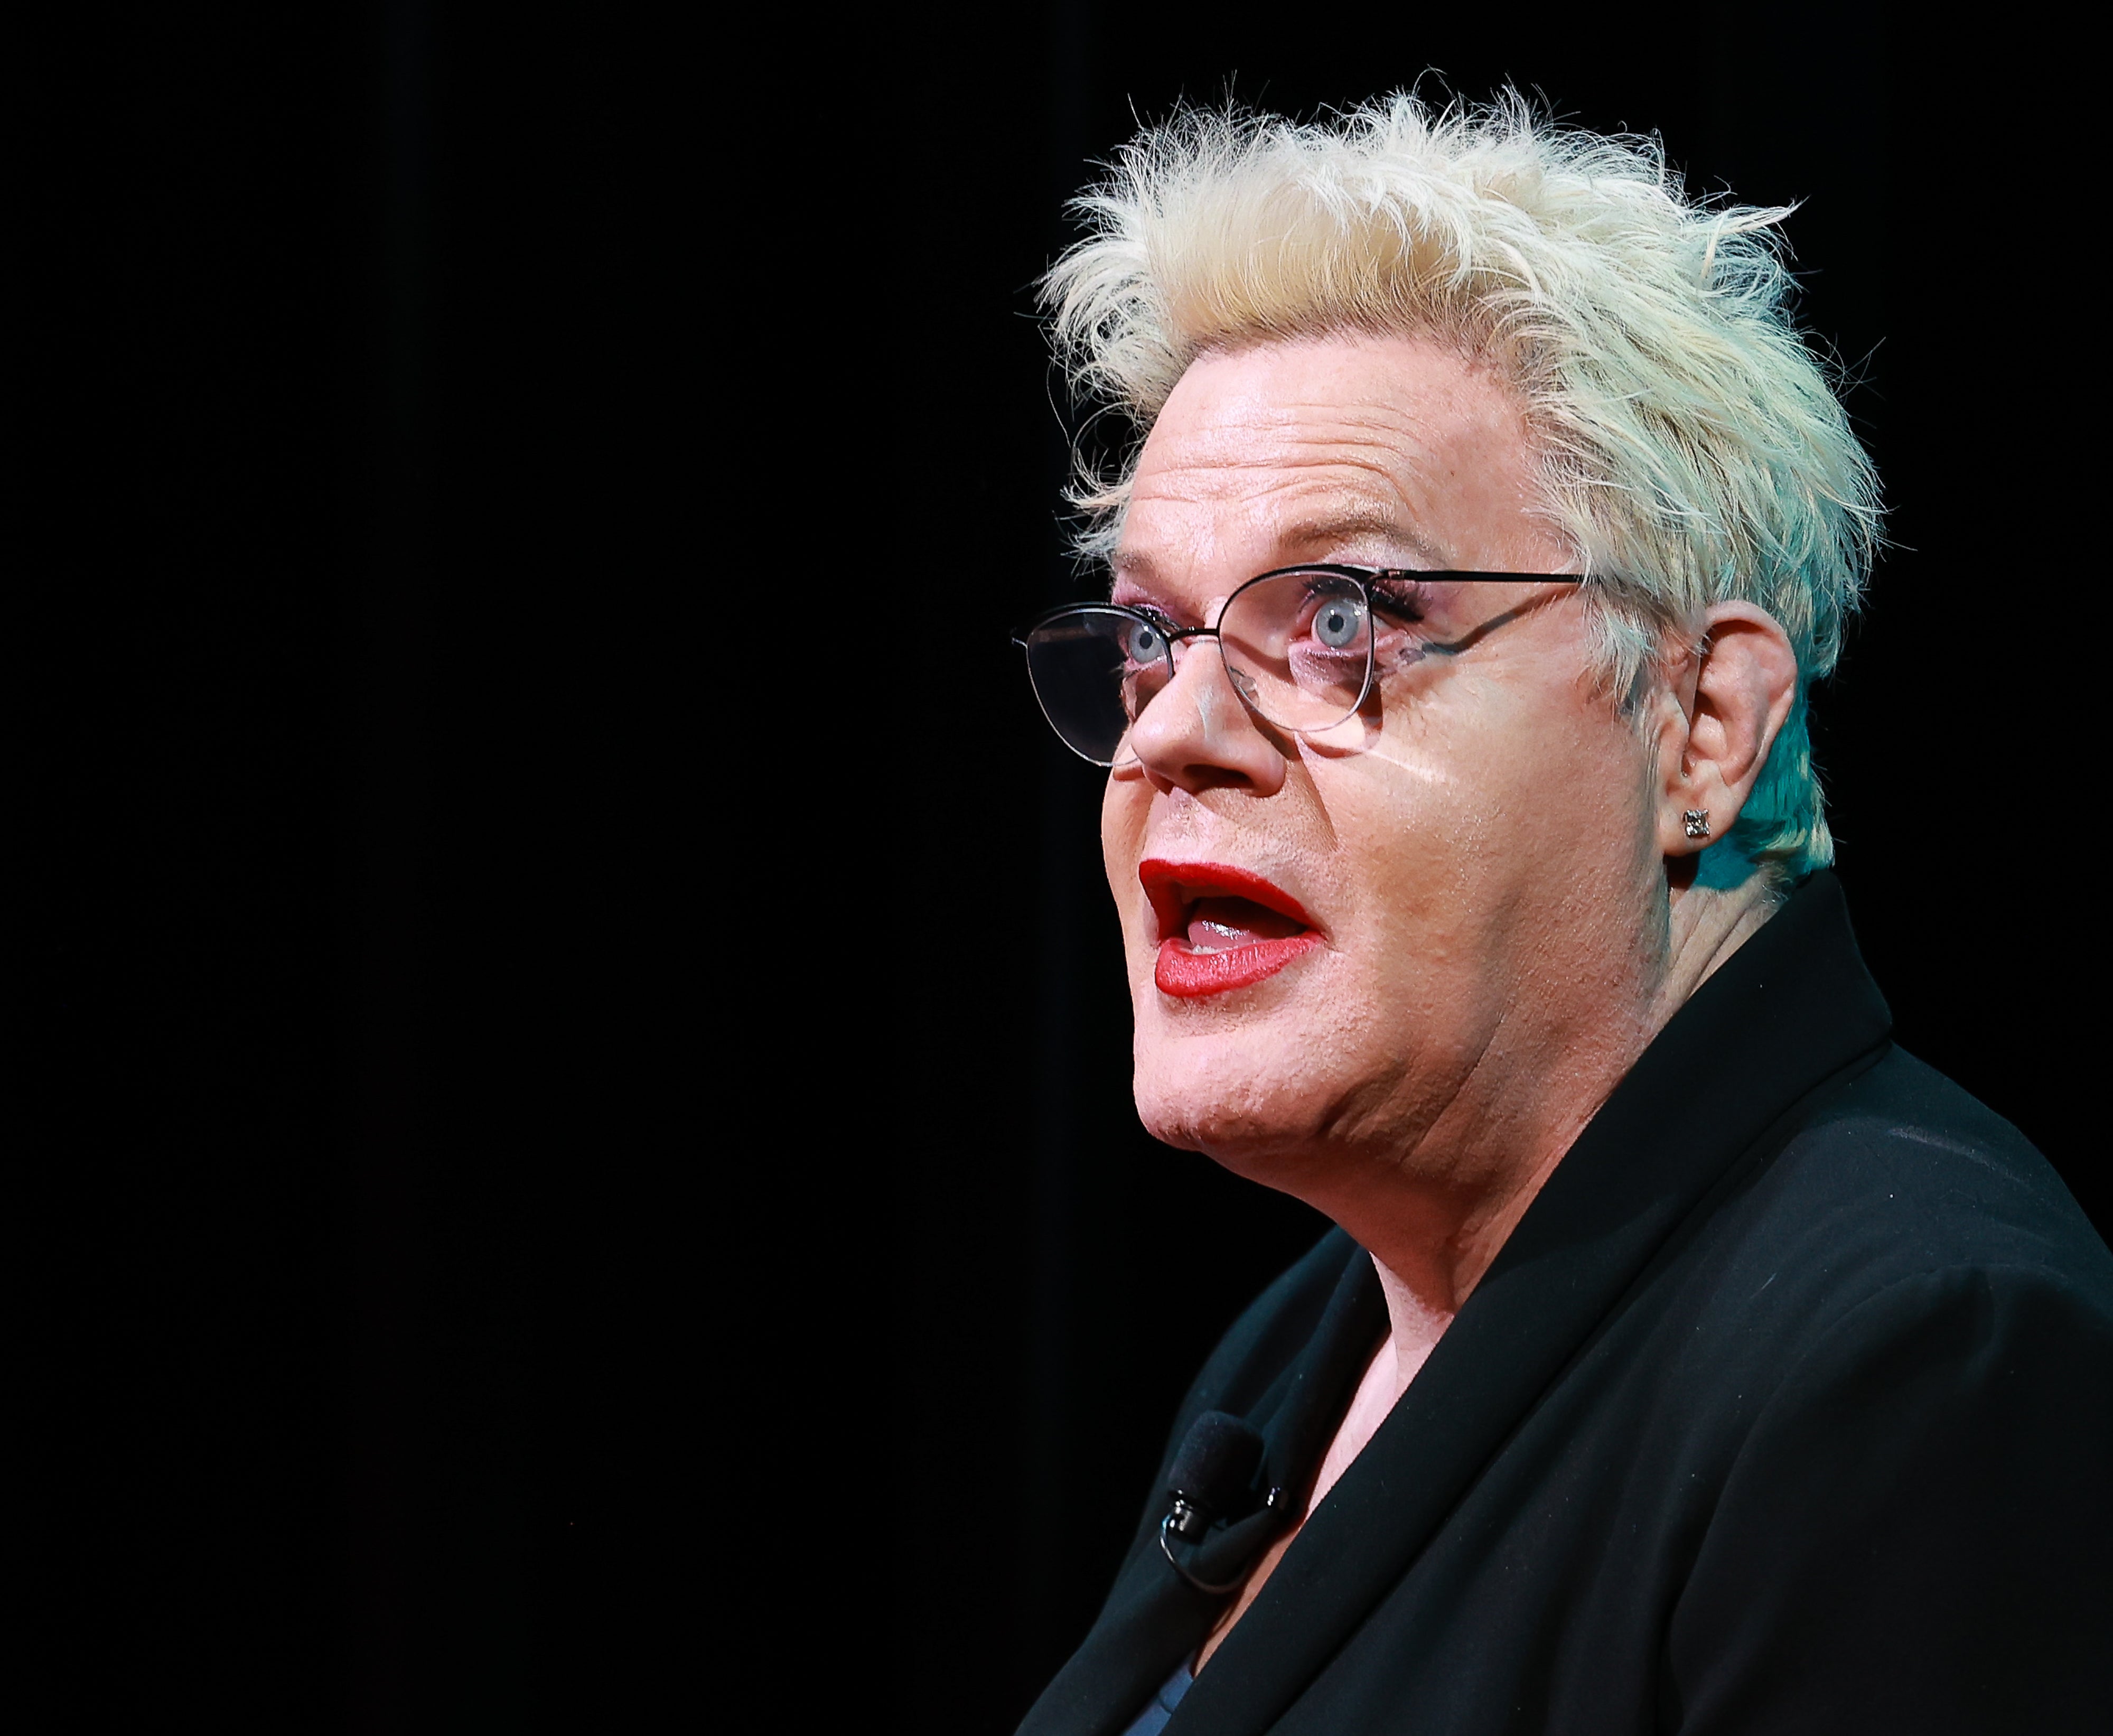 Izzard announced earlier this month that she was also going by the name Suzy